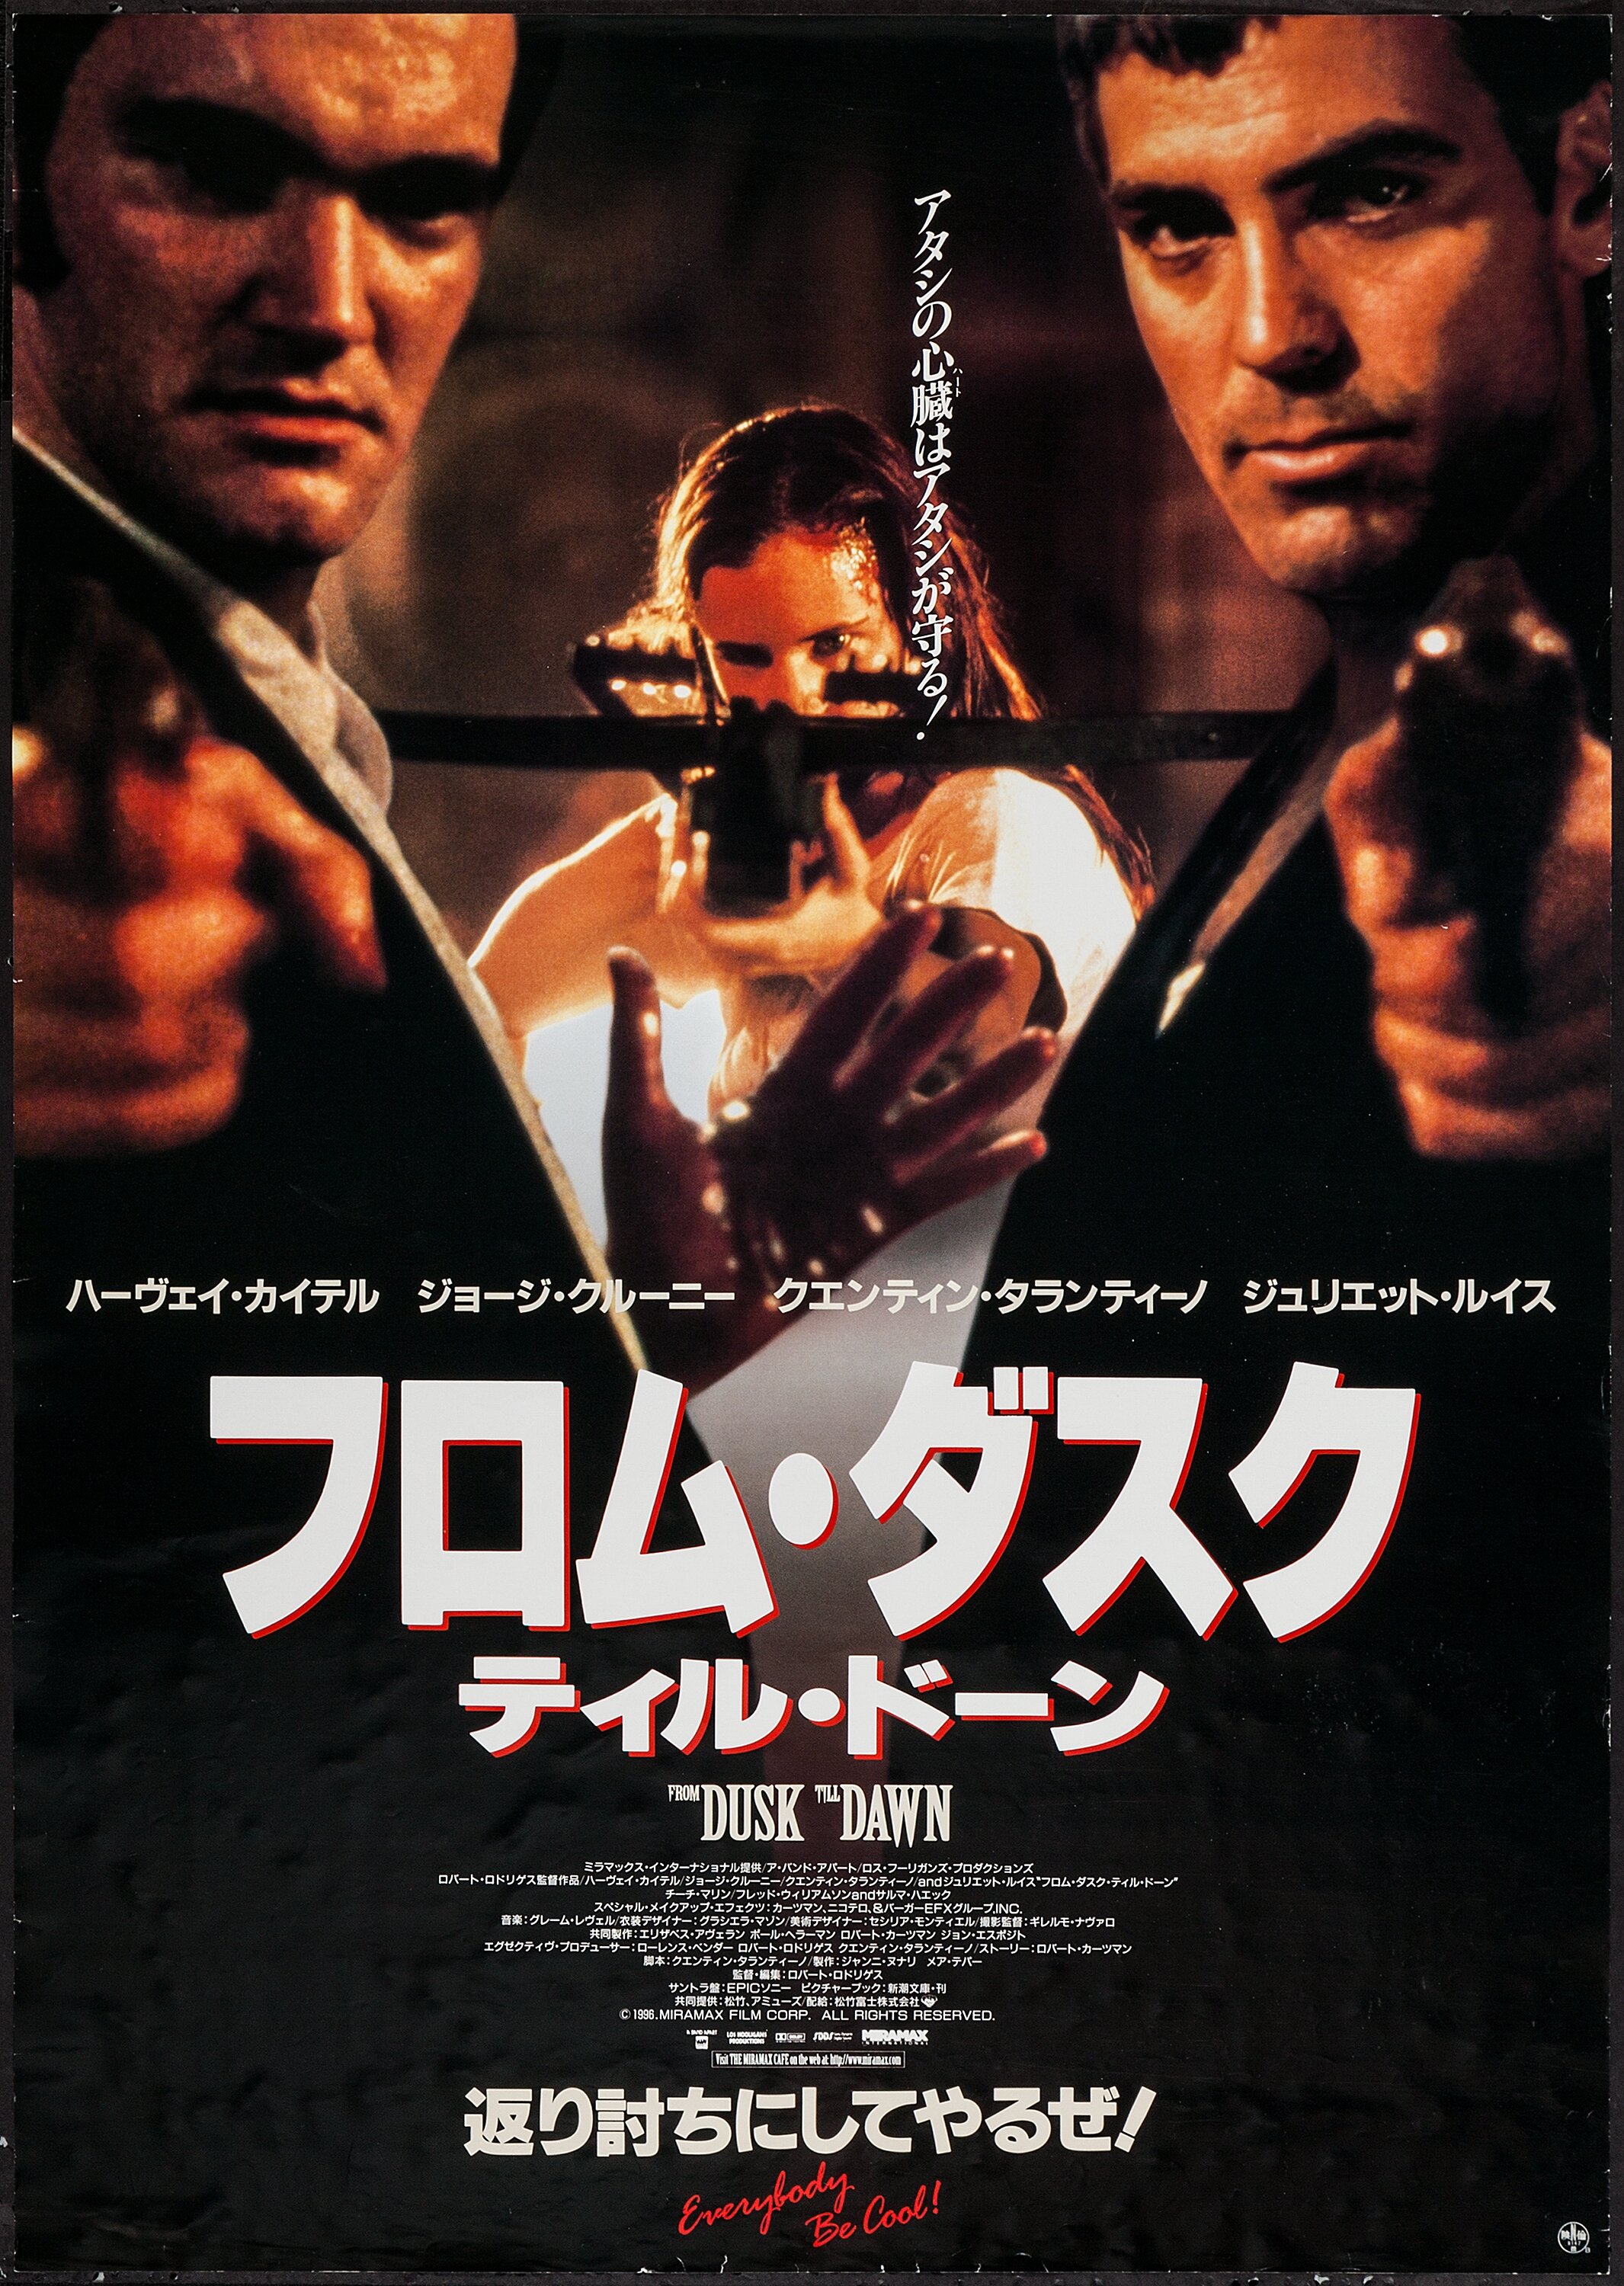 From Dusk Till Dawn Other Lot Miramax 1996 Japanese B2s 2 Lot Heritage Auctions